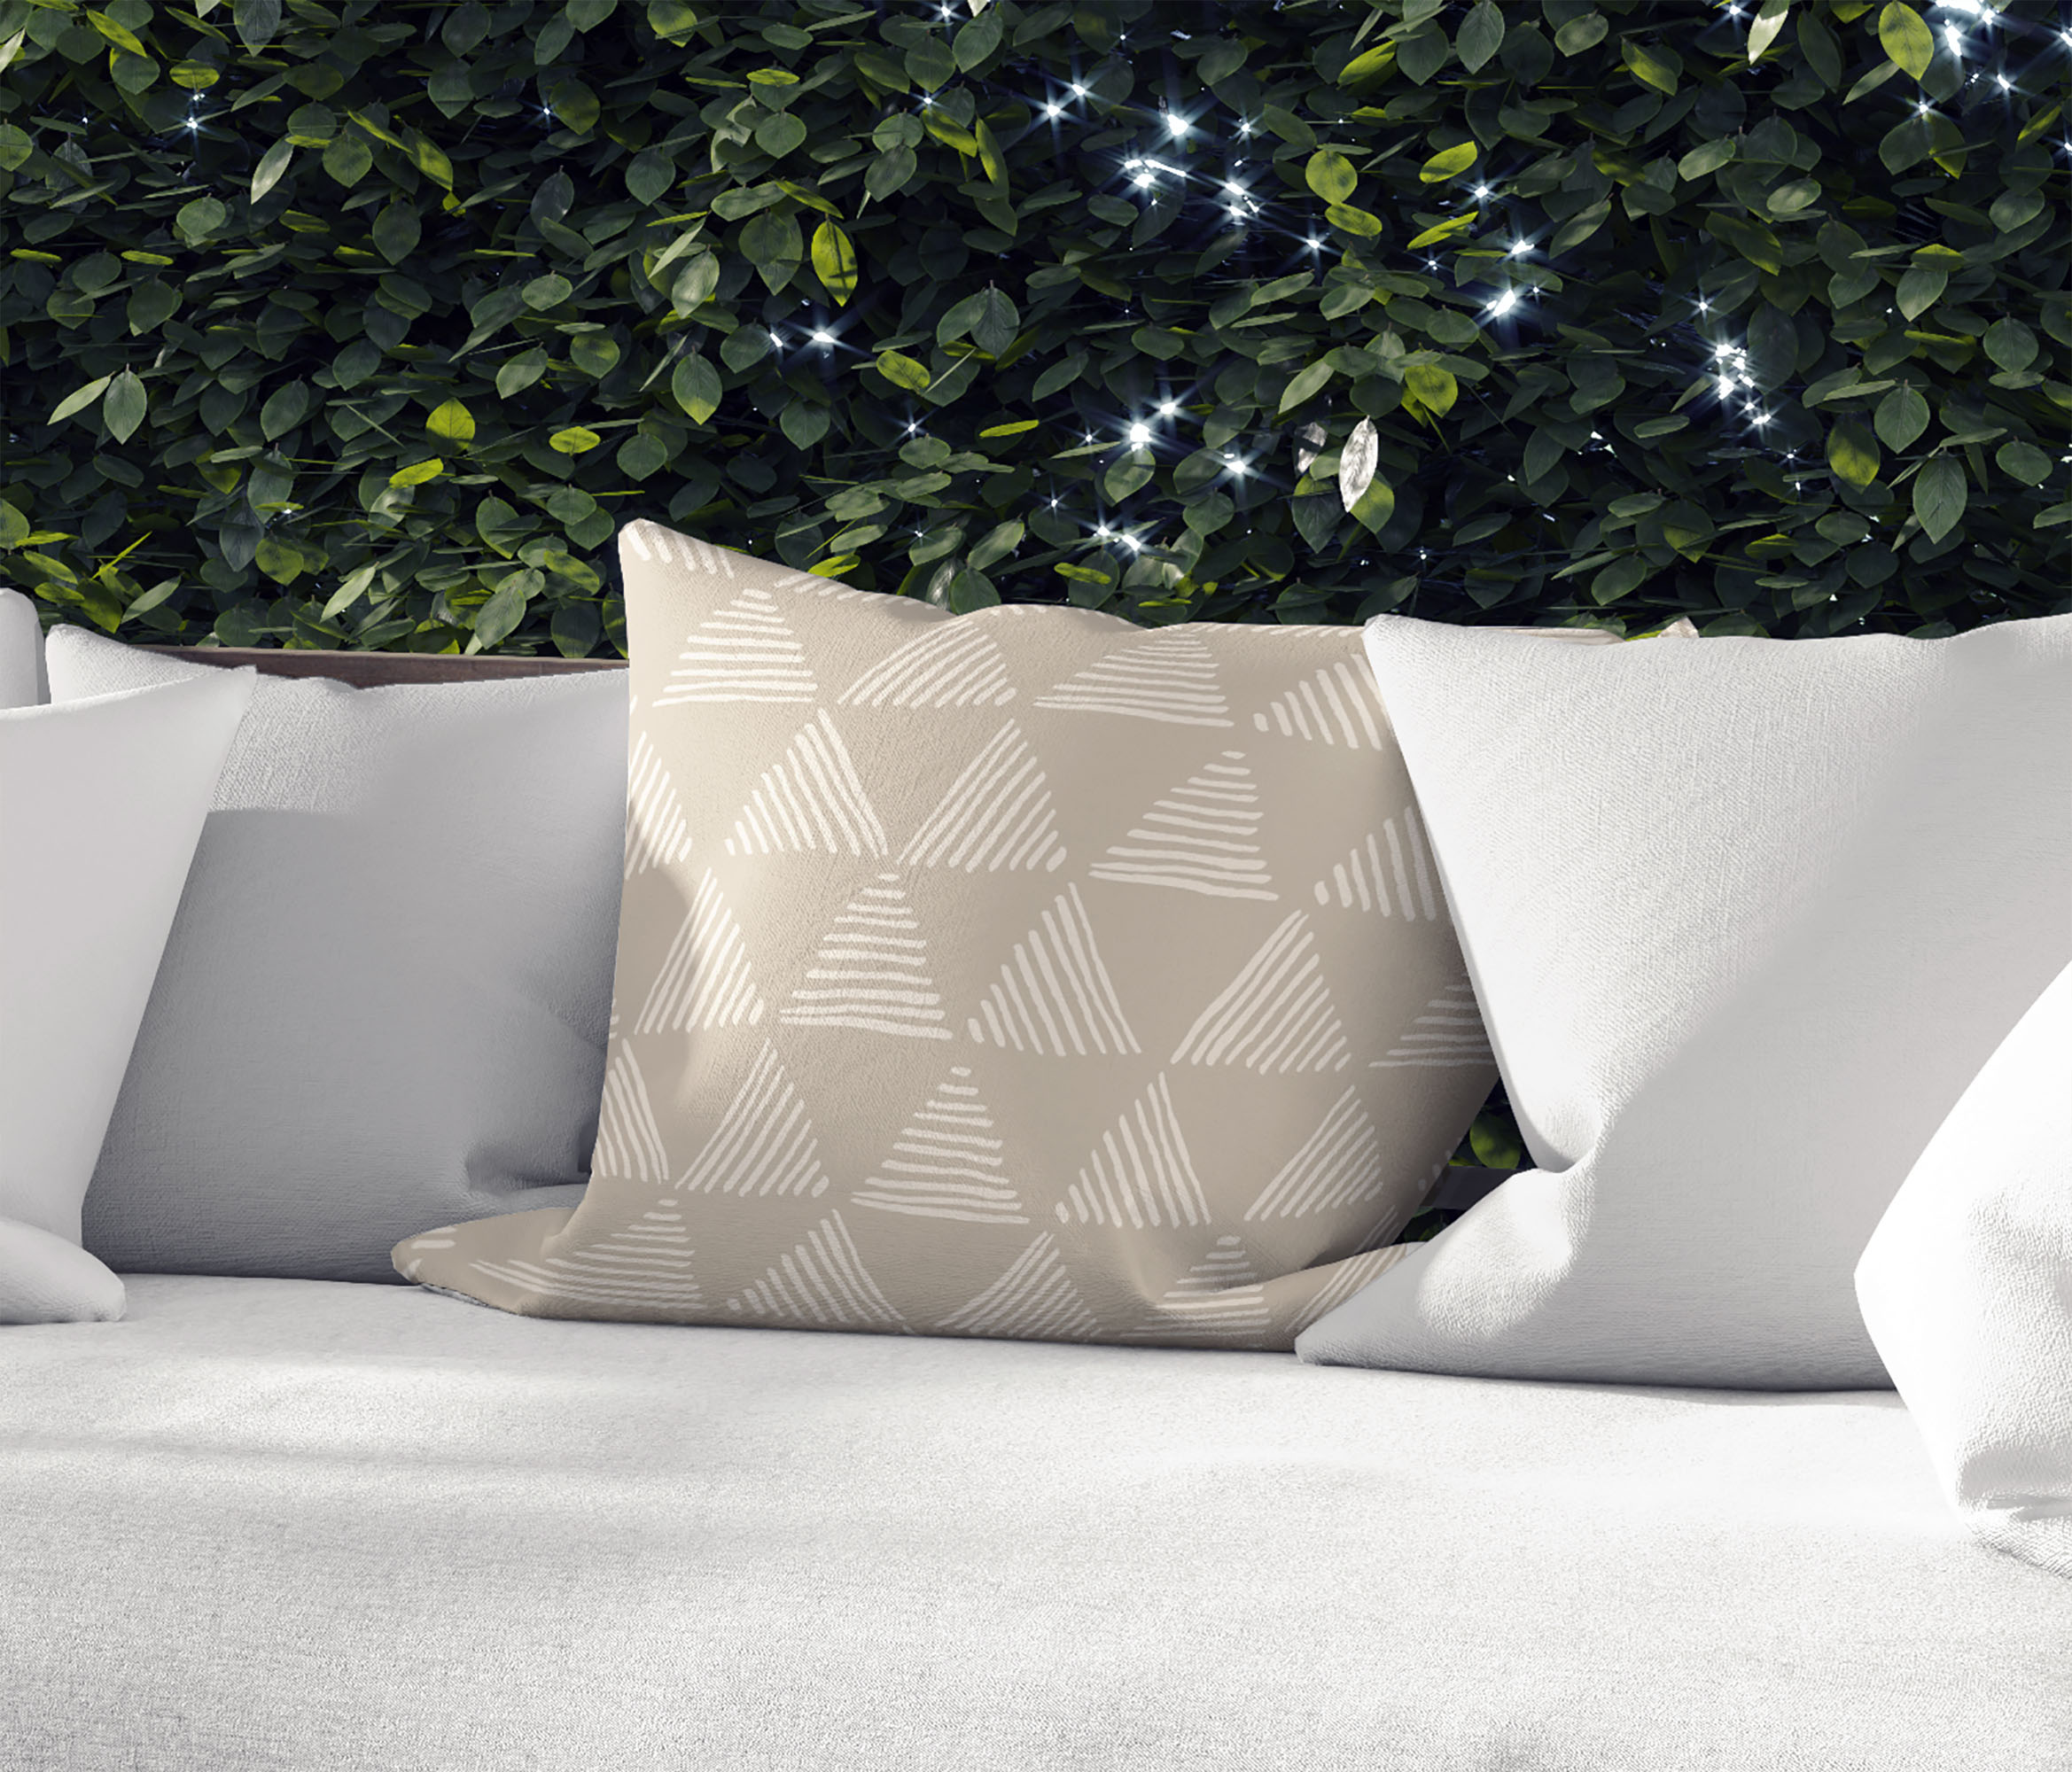 Triangular Prism Beige Outdoor Pillow by Kavka Designs - image 5 of 5